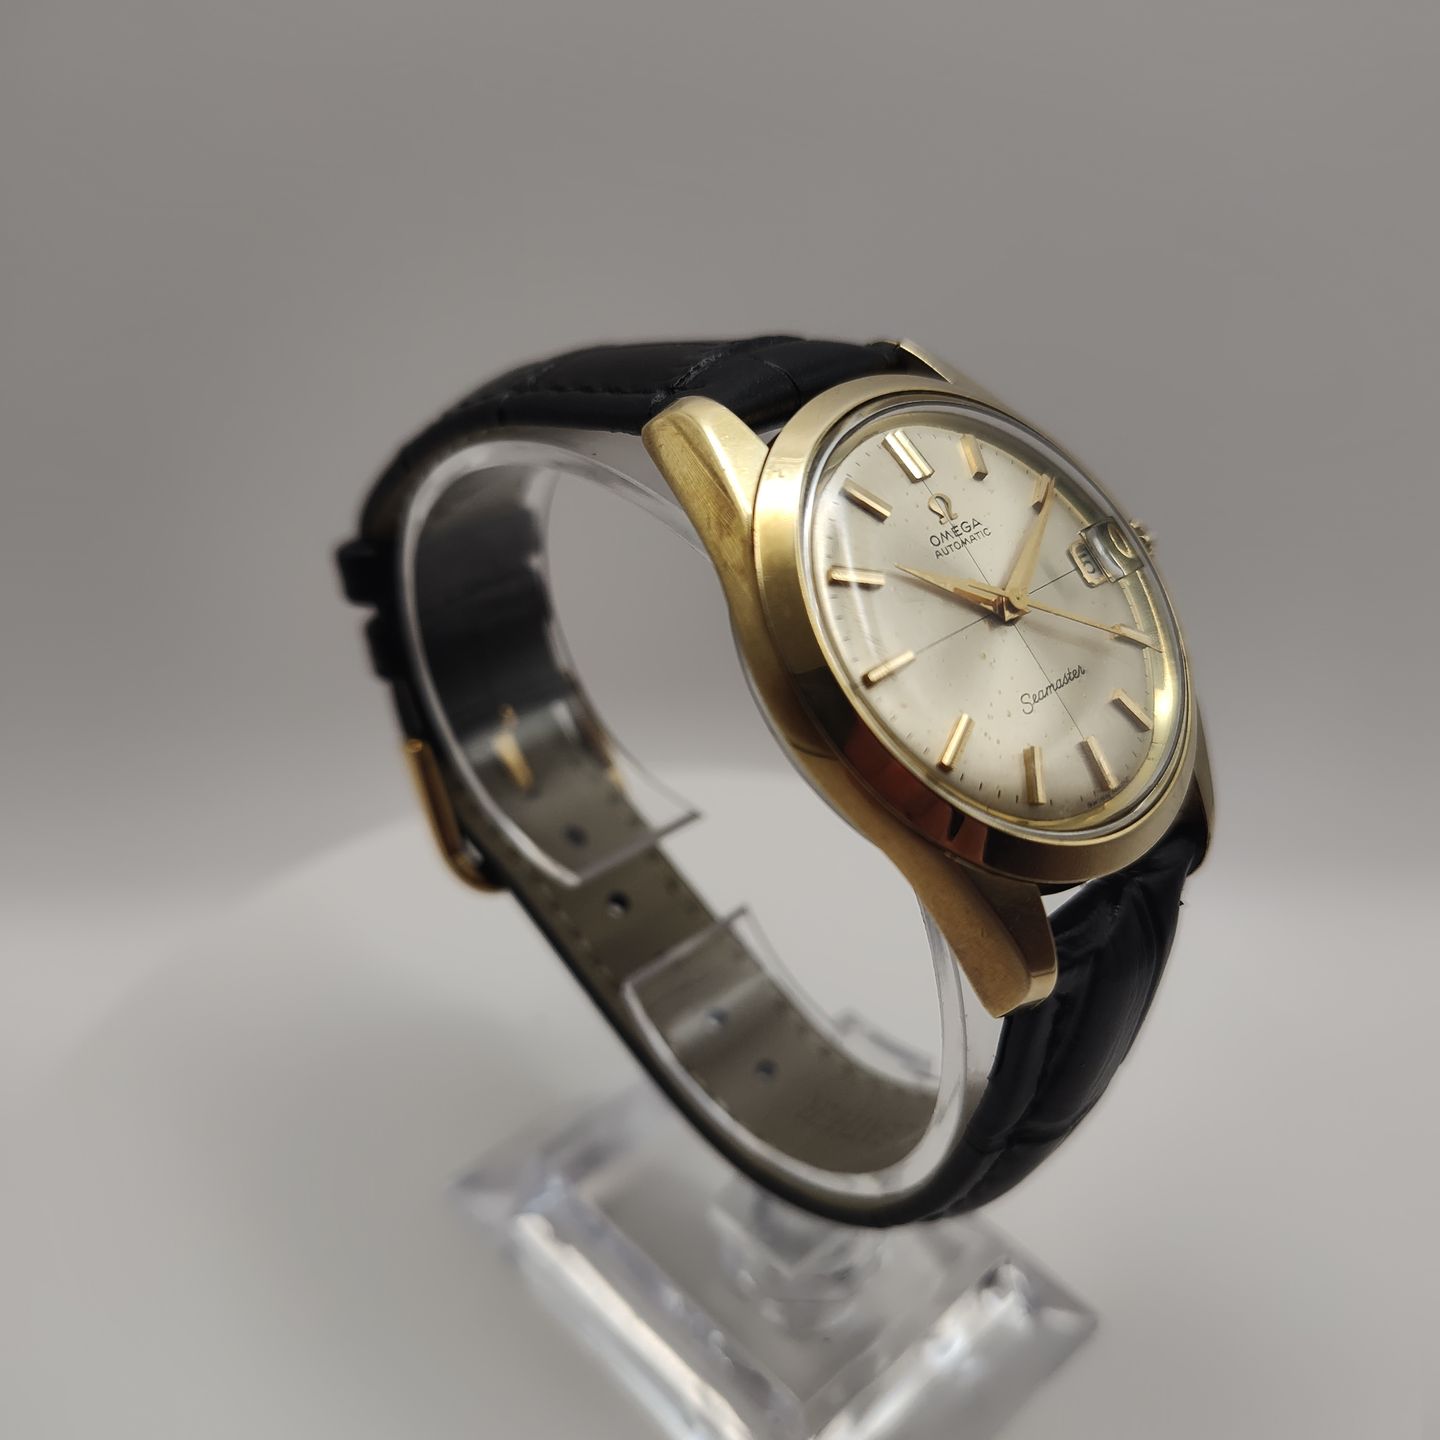 Omega Seamaster Omega Seamaster Automatic Vintage Cross Hair Date (1963) - Champagne dial 35 mm Steel case (5/8)